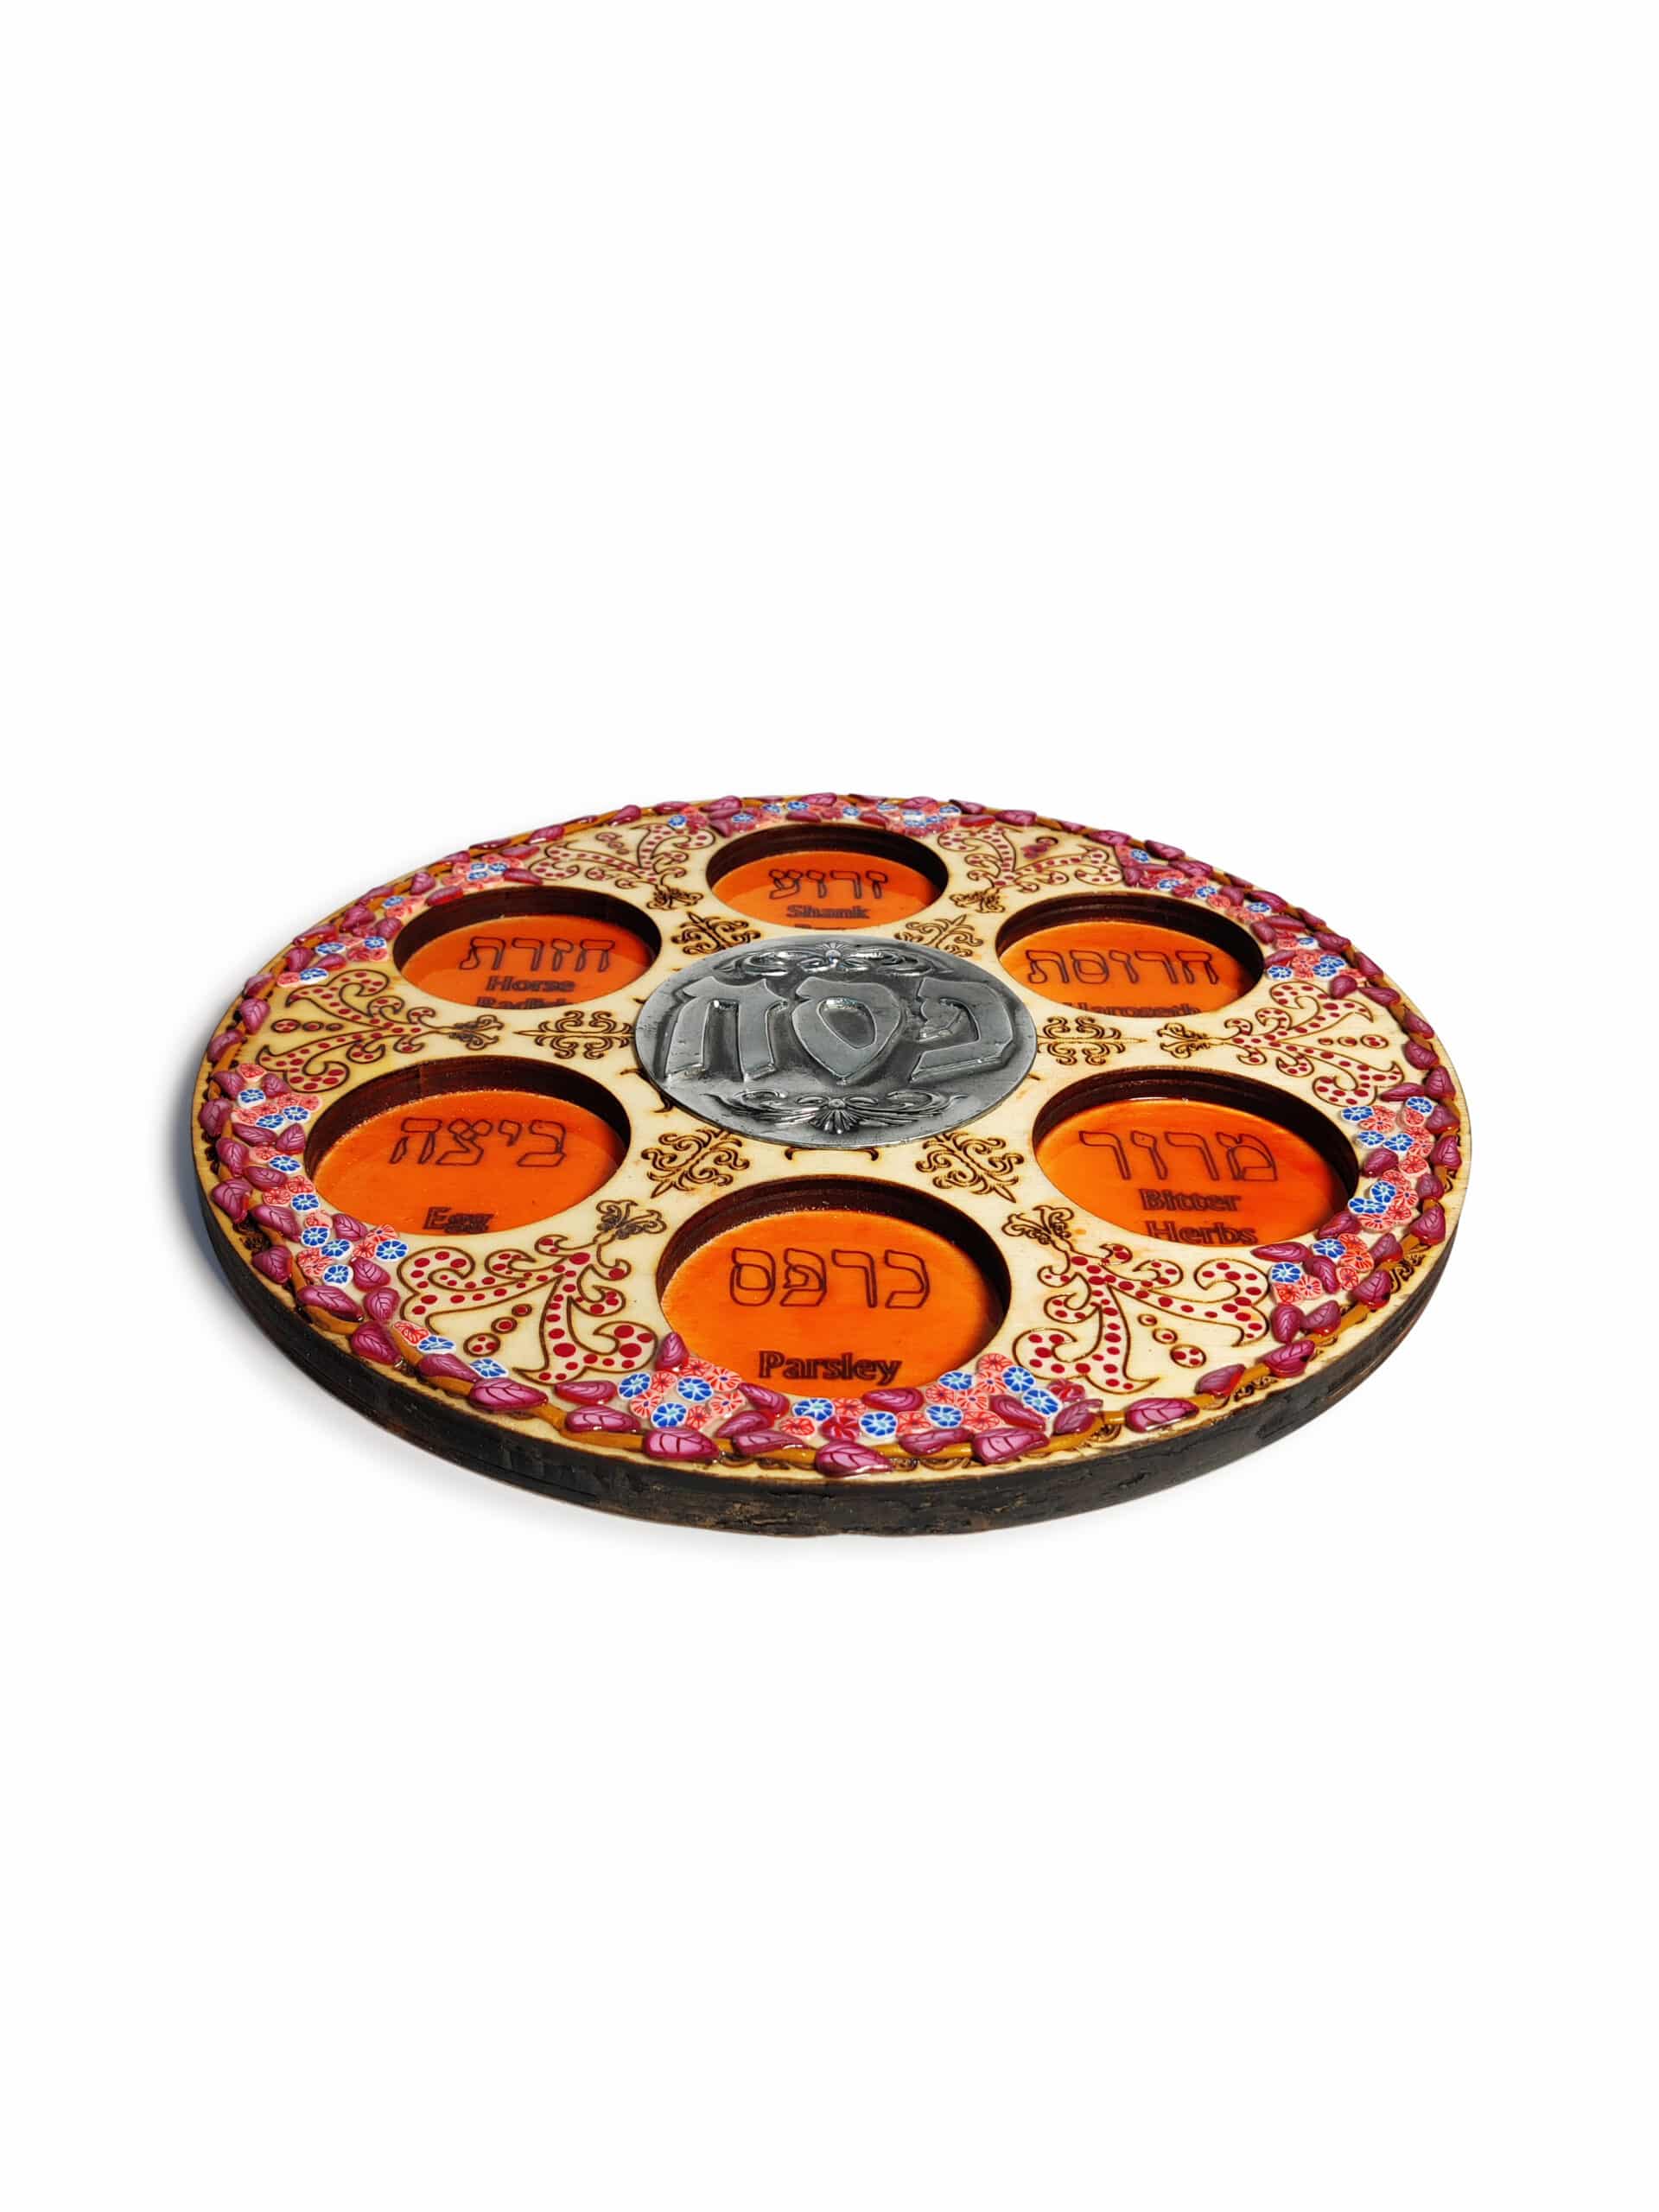 Wood & Clay Purple Ornate Passover Seder Plate